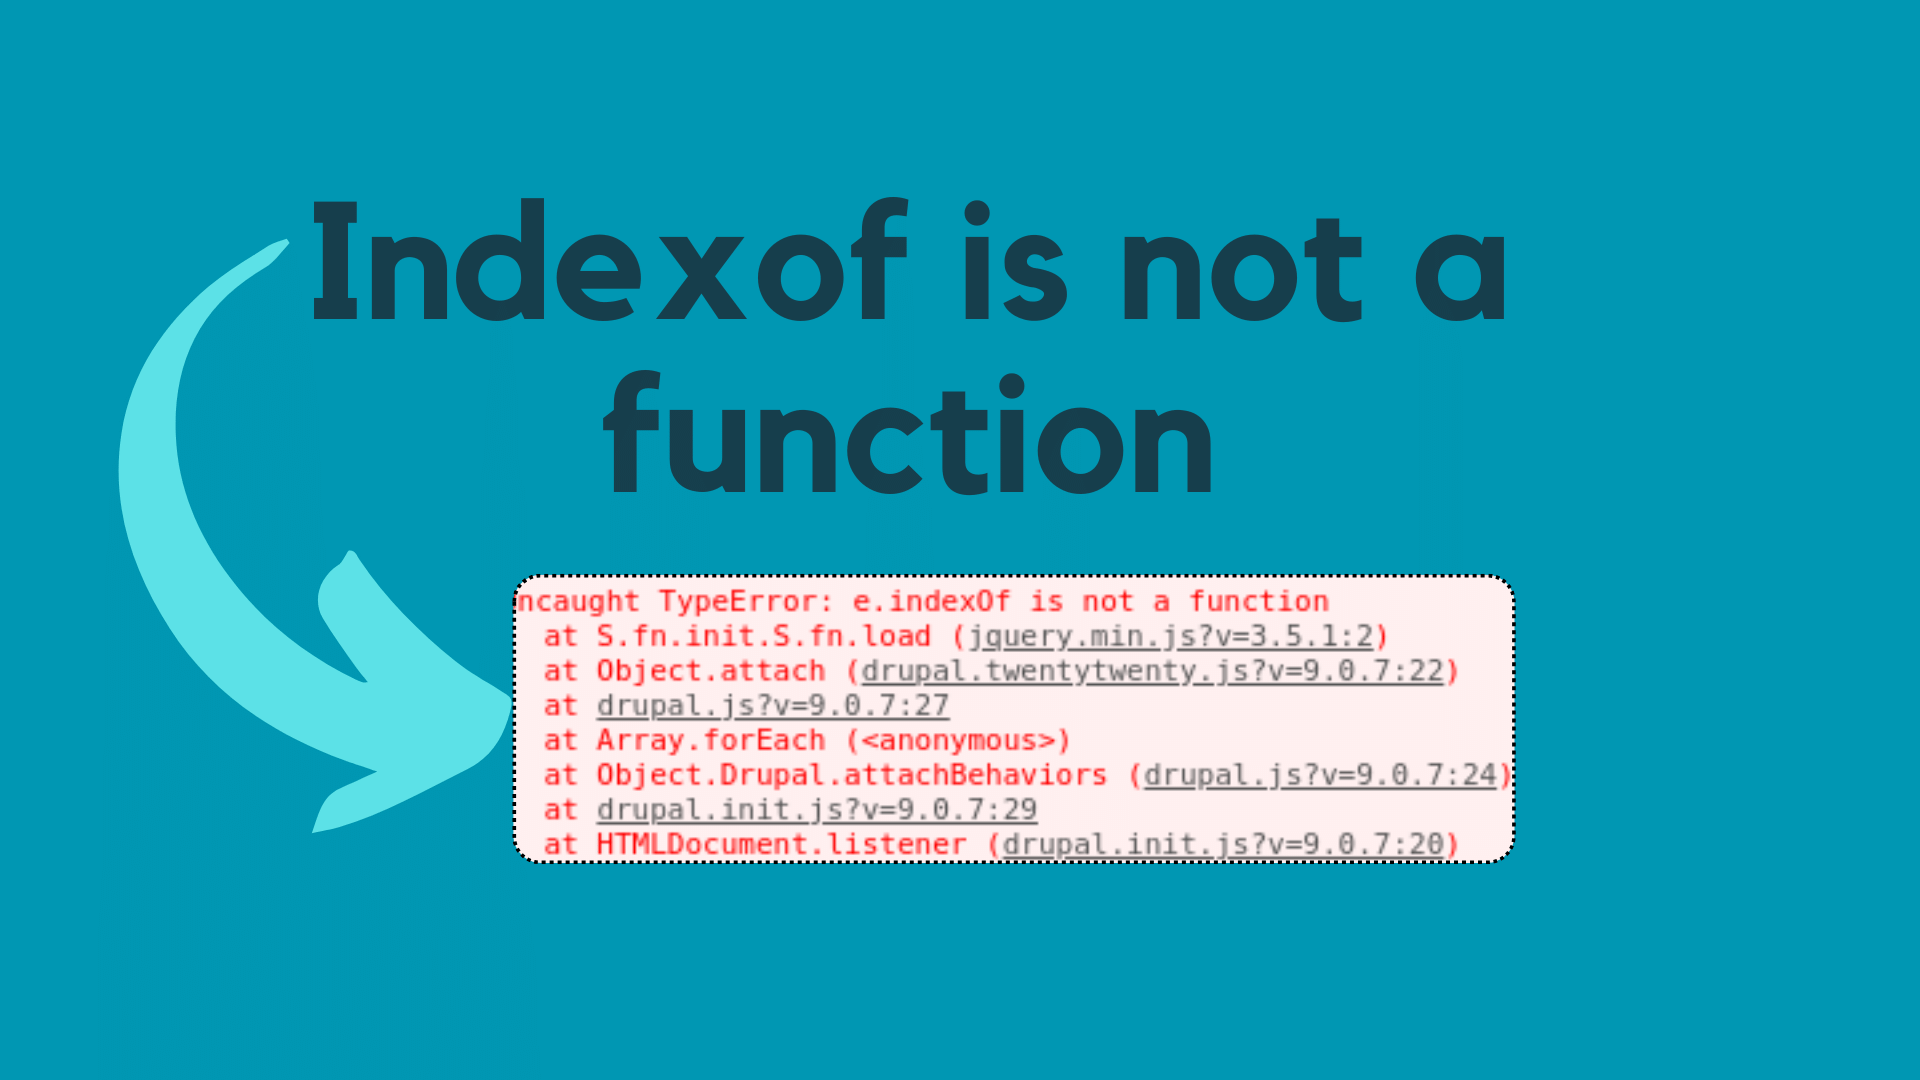 Indexof is not a function